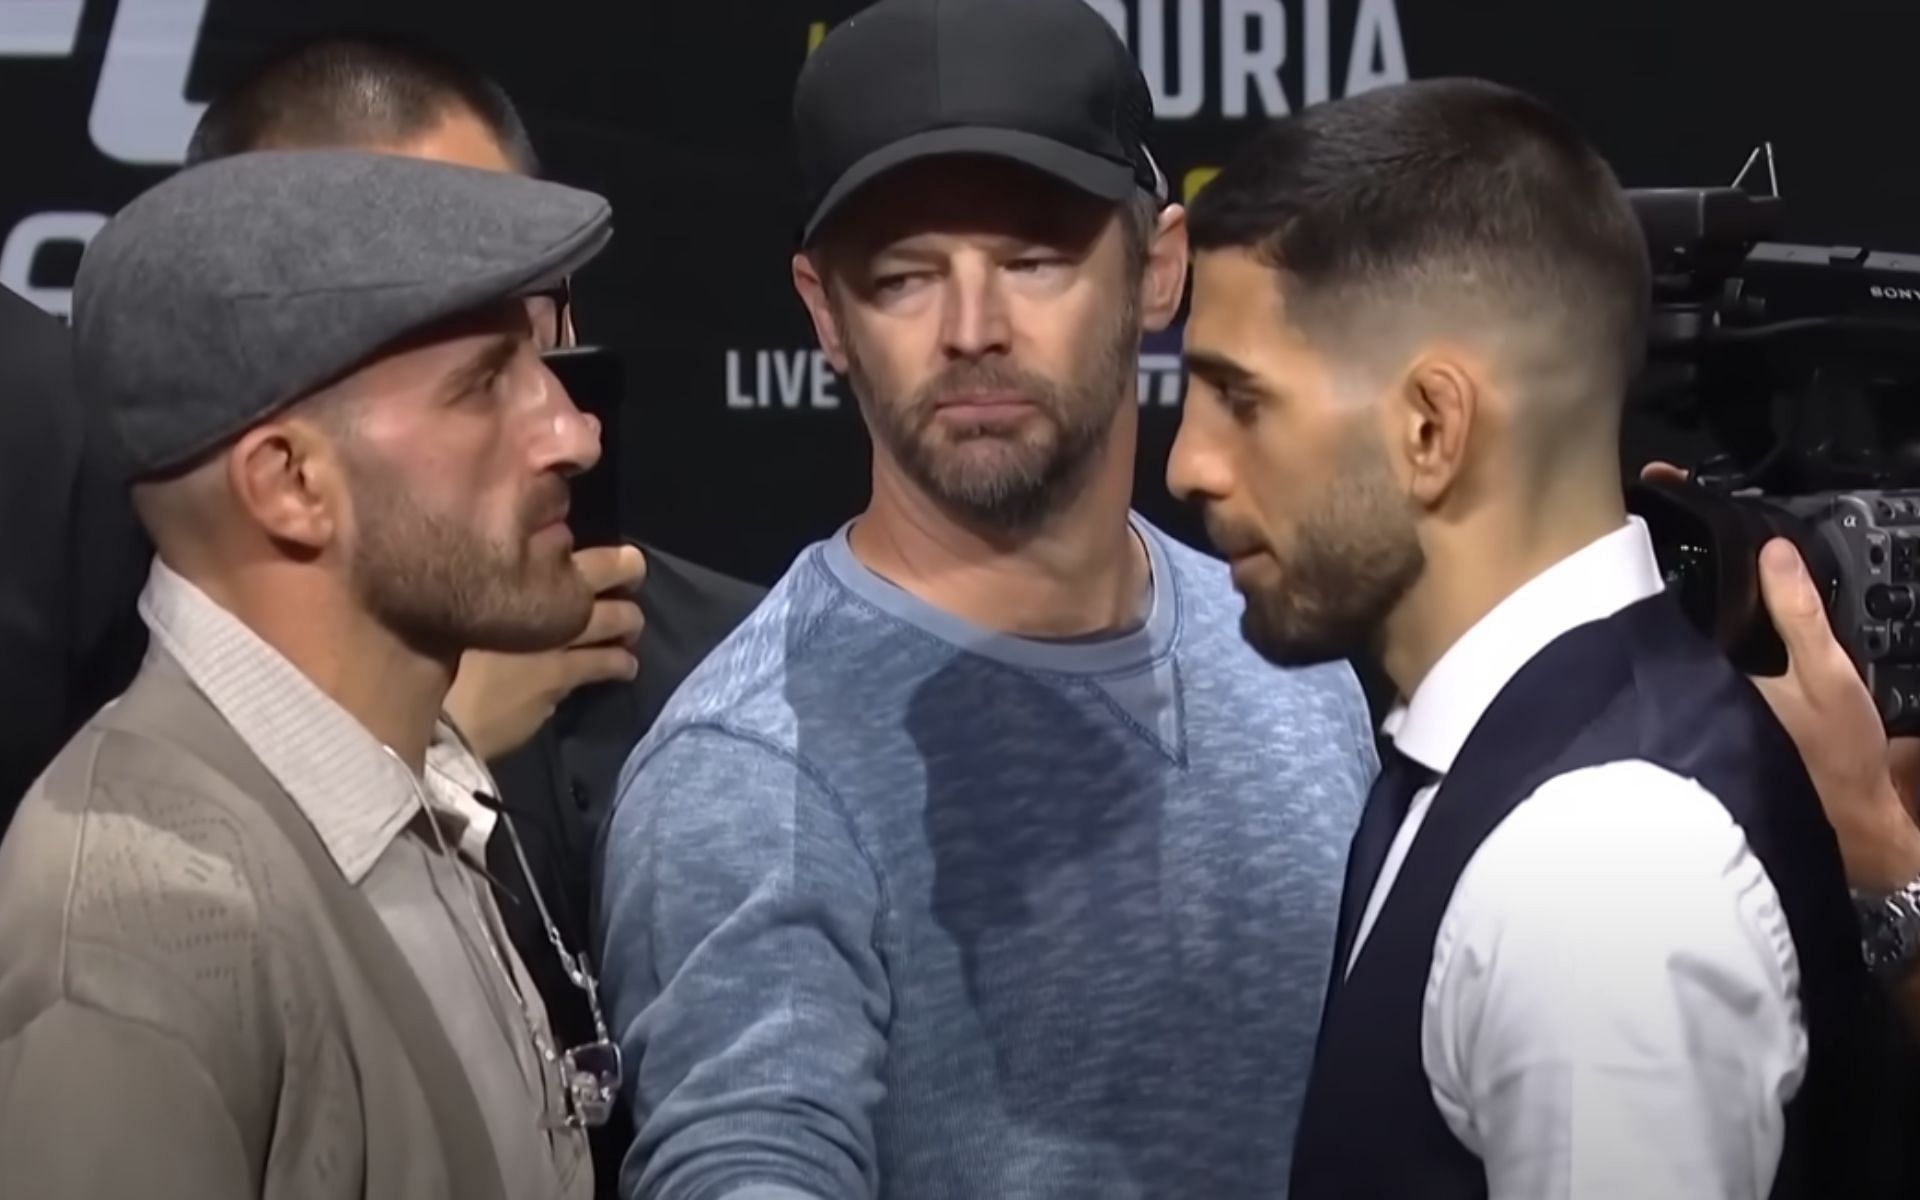 Alexander Volkanovski (left) and Ilia Topuria (right) partook in a reverential face-off at the end of the UFC 298 pre-fight press conference [Image courtesy: UFC on YouTube]